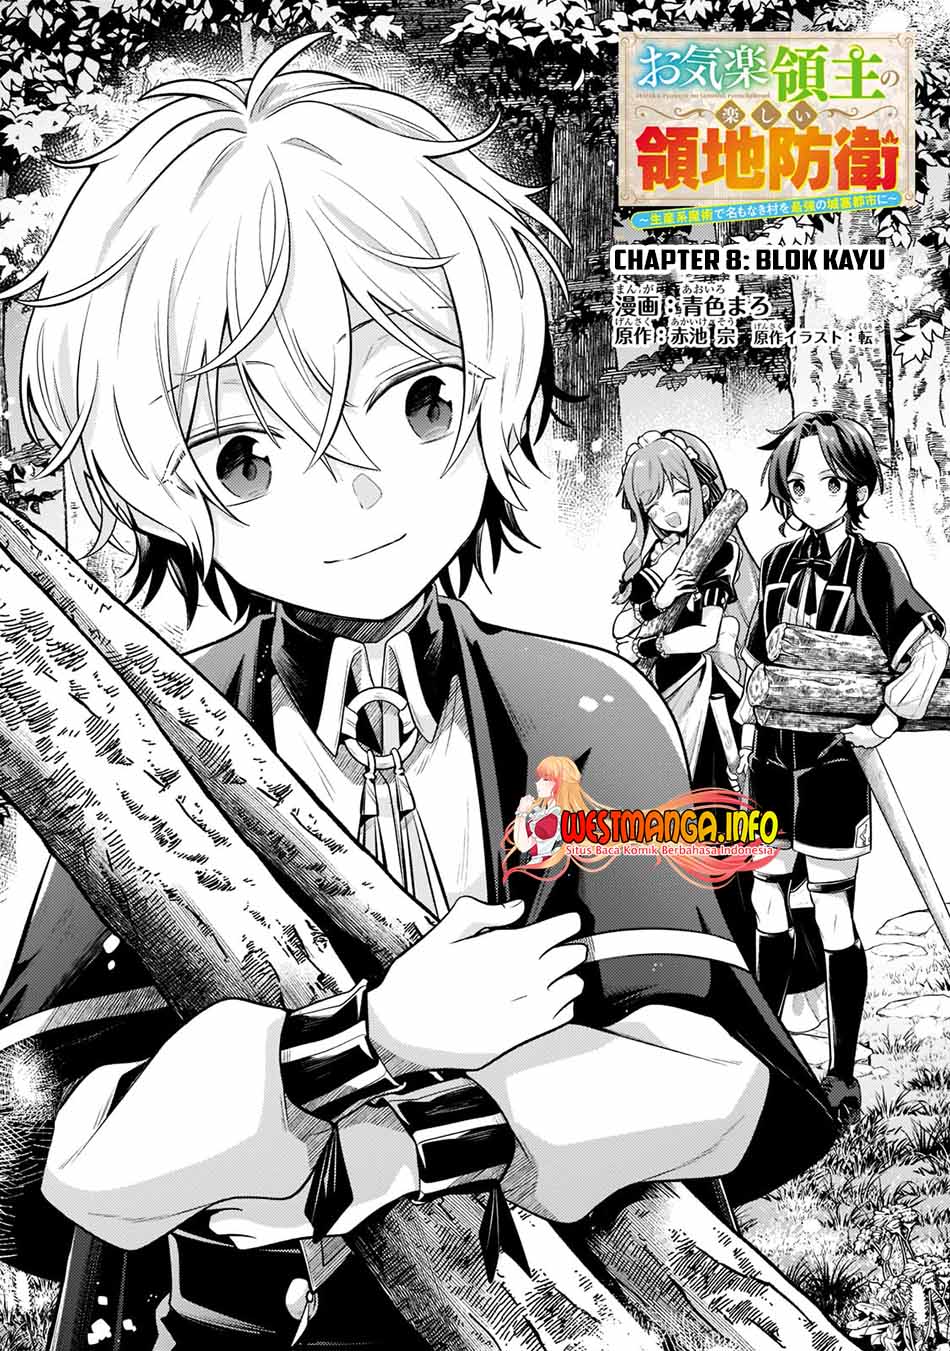 Fun Territory Defense Of The Easy-Going Lord ~The Nameless Village Is Made Into The Strongest Fortified City By Production Magic~ Chapter 08 - 169